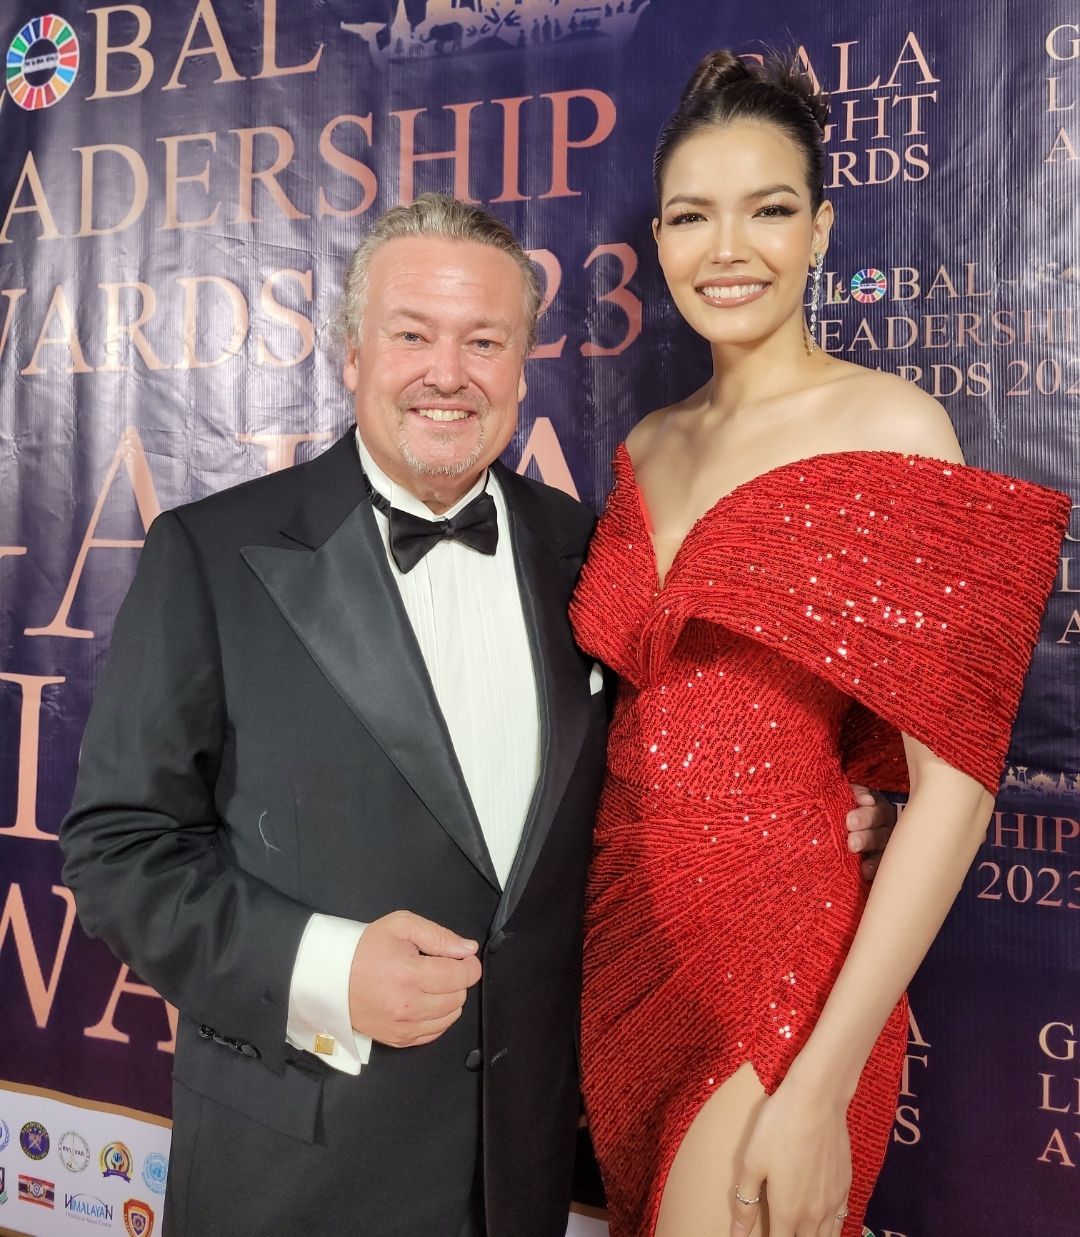 President Richard Nilsson from Adventure of Humanity together with Paweensuda Druin, Miss Universe